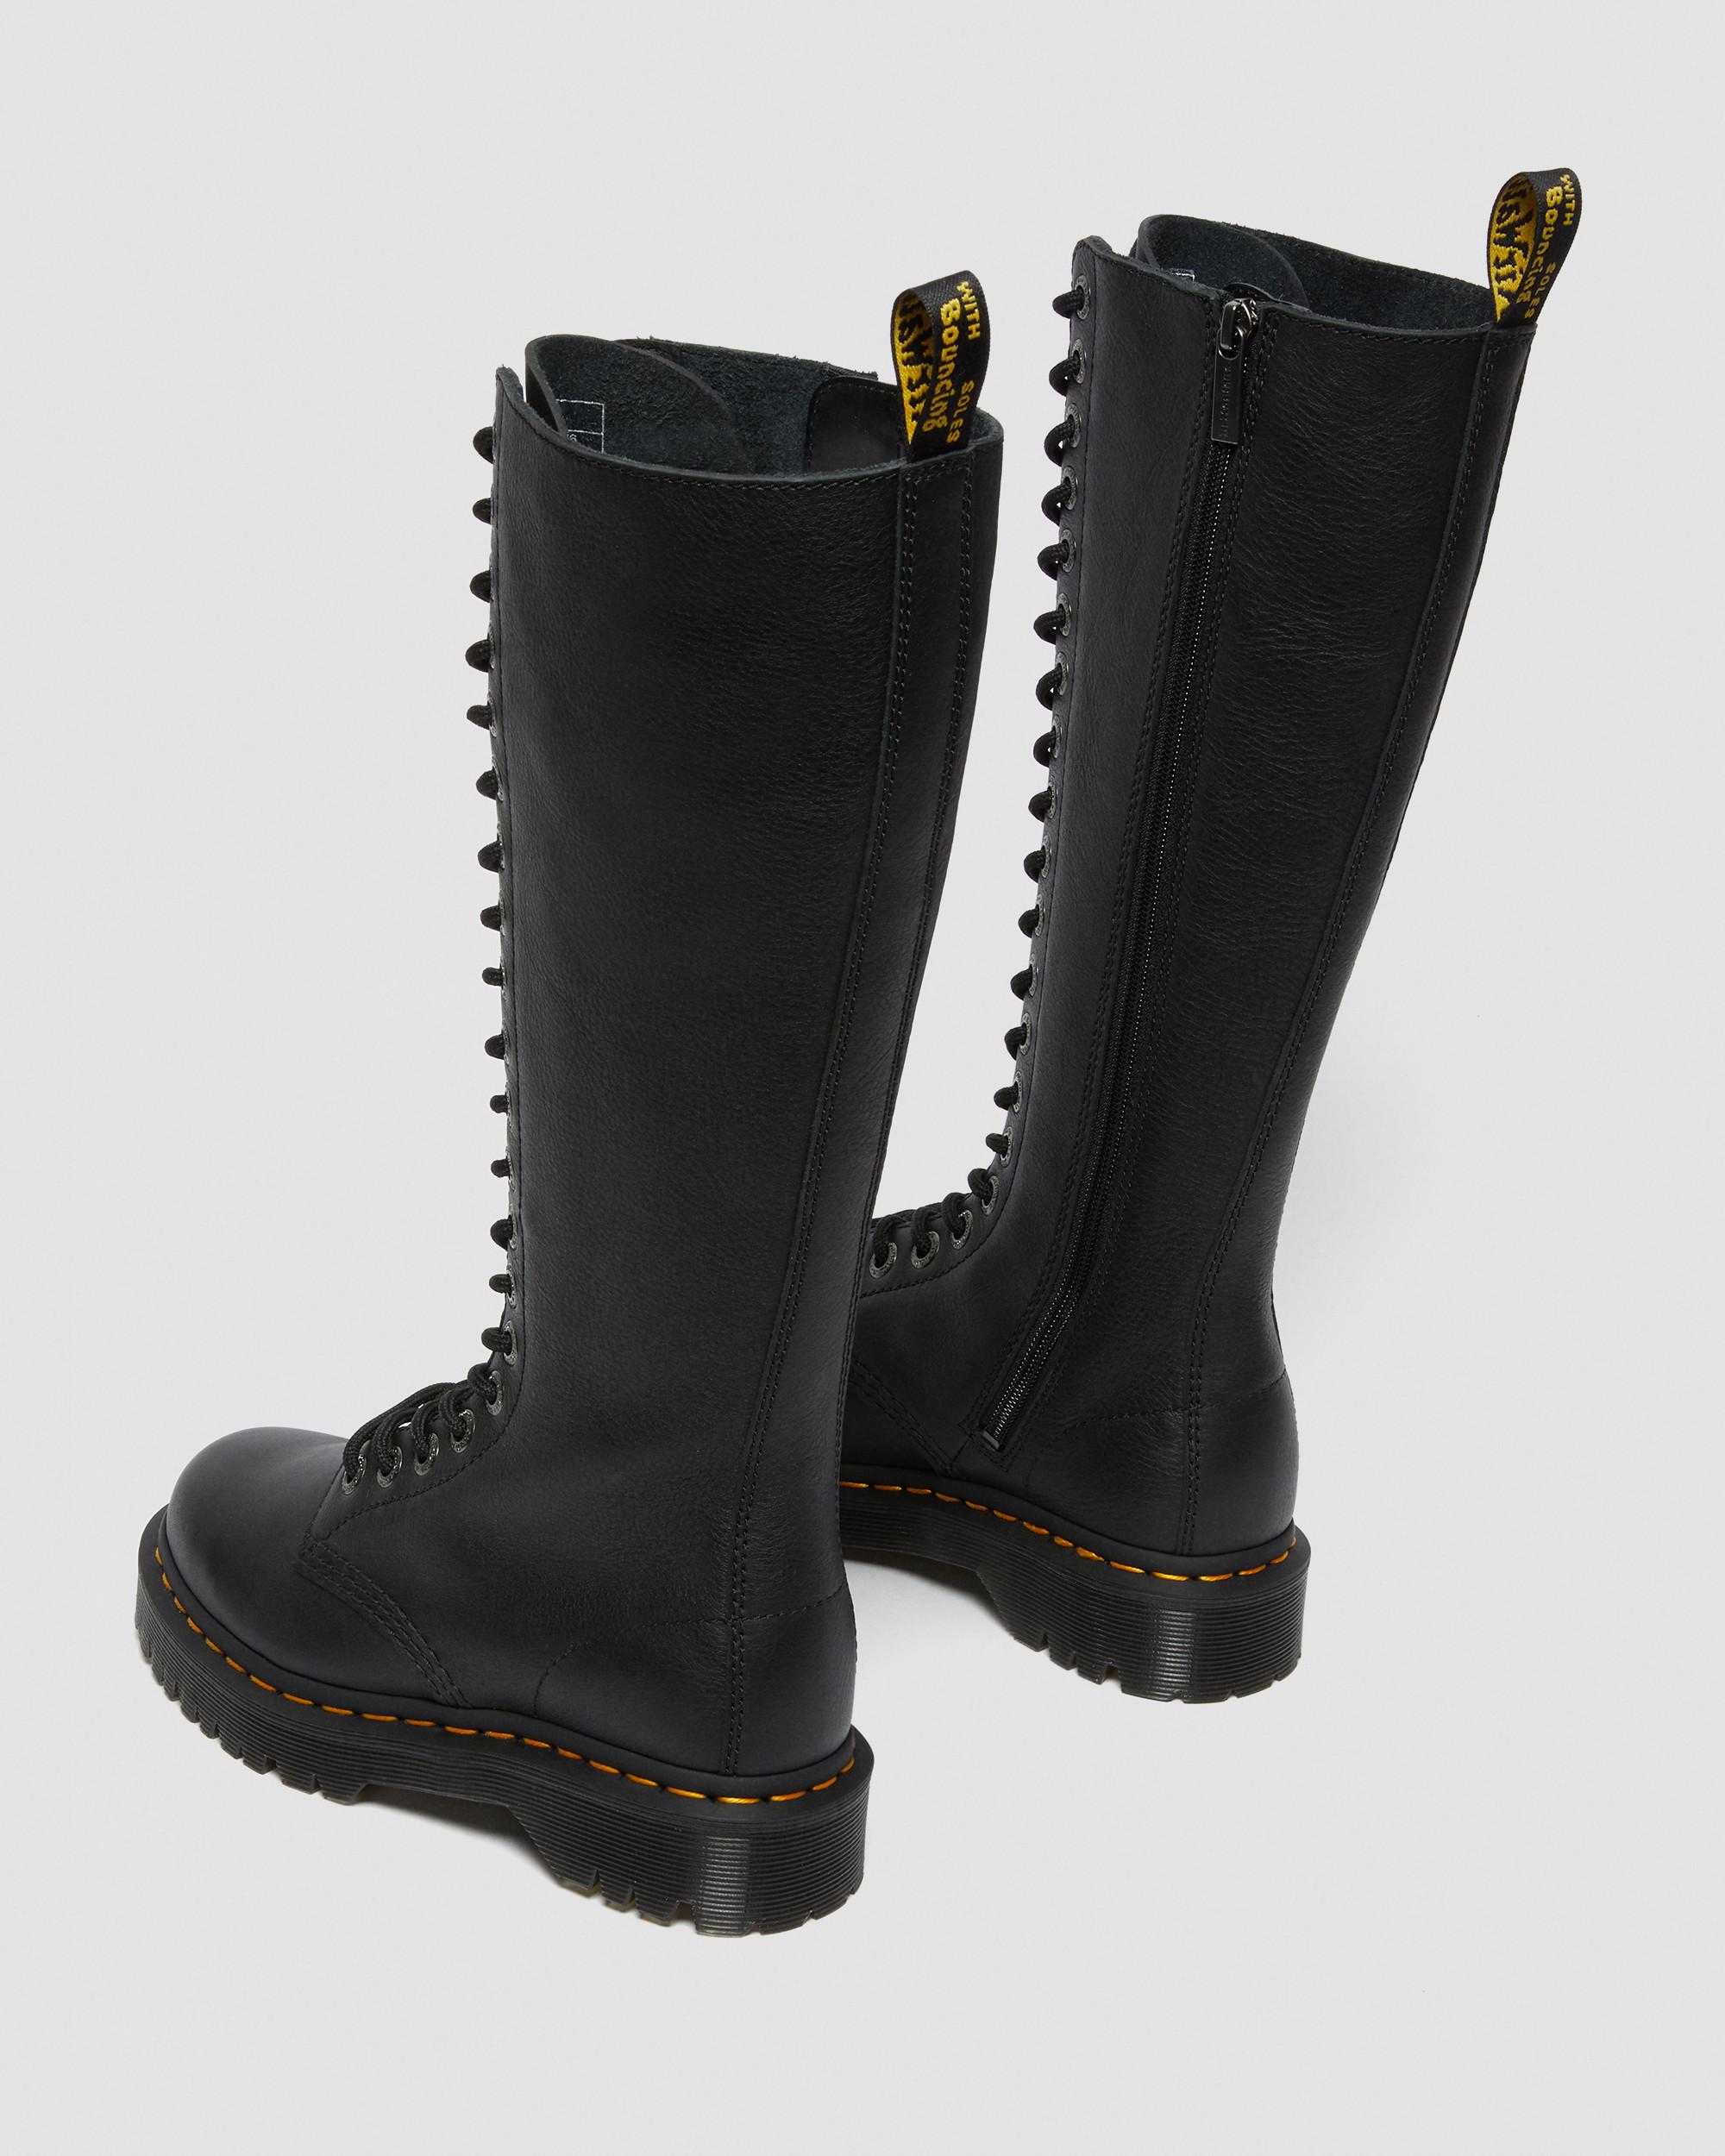 1B60 Bex Pisa Leather Knee High Boots in Black